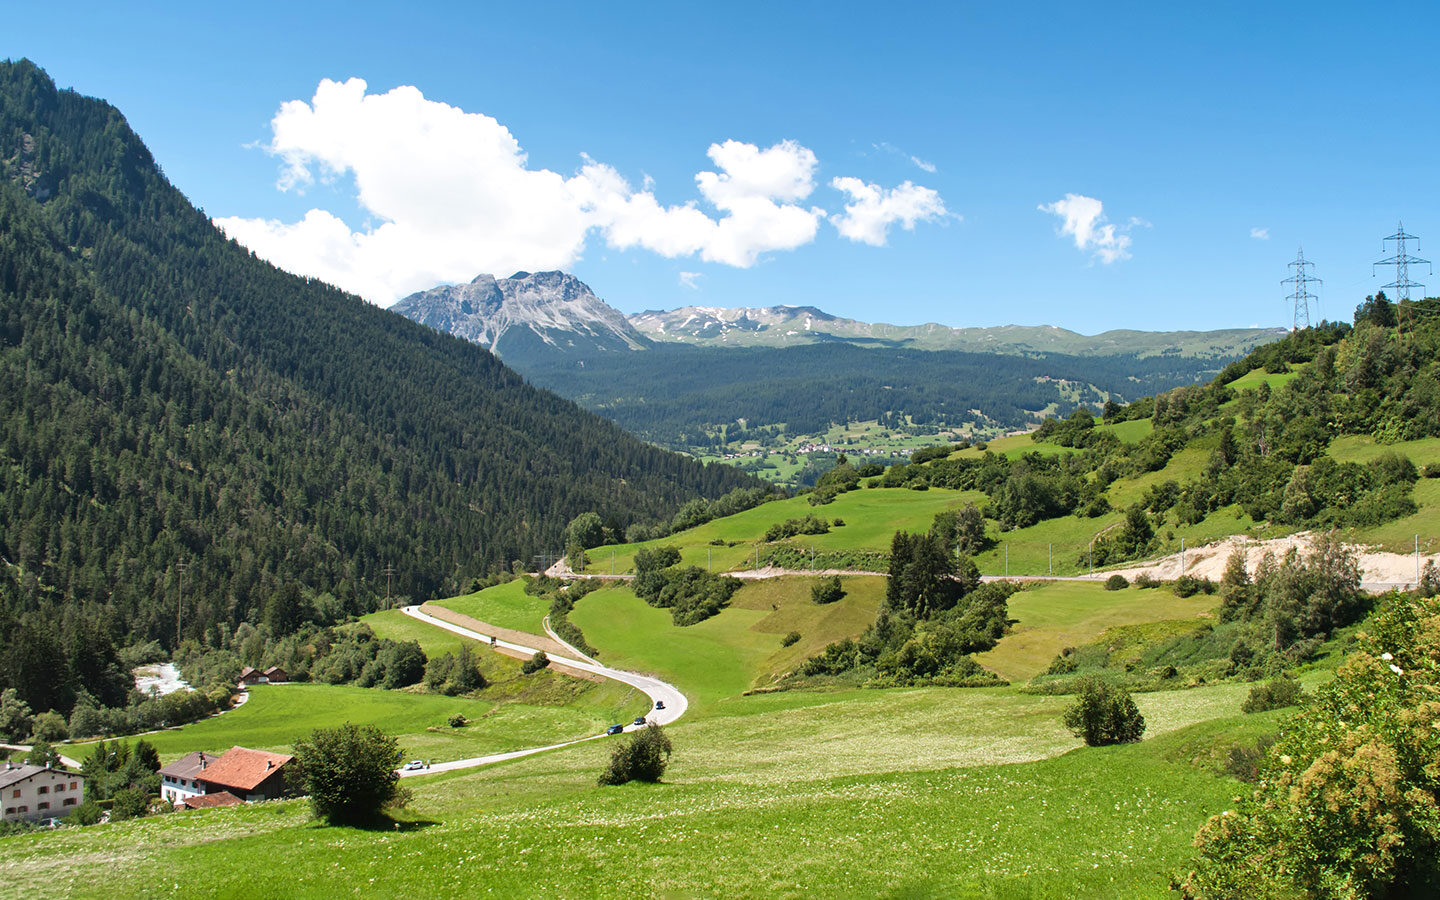 Alpine scenery along the route of the Bernina and Glacier Express scenic trains